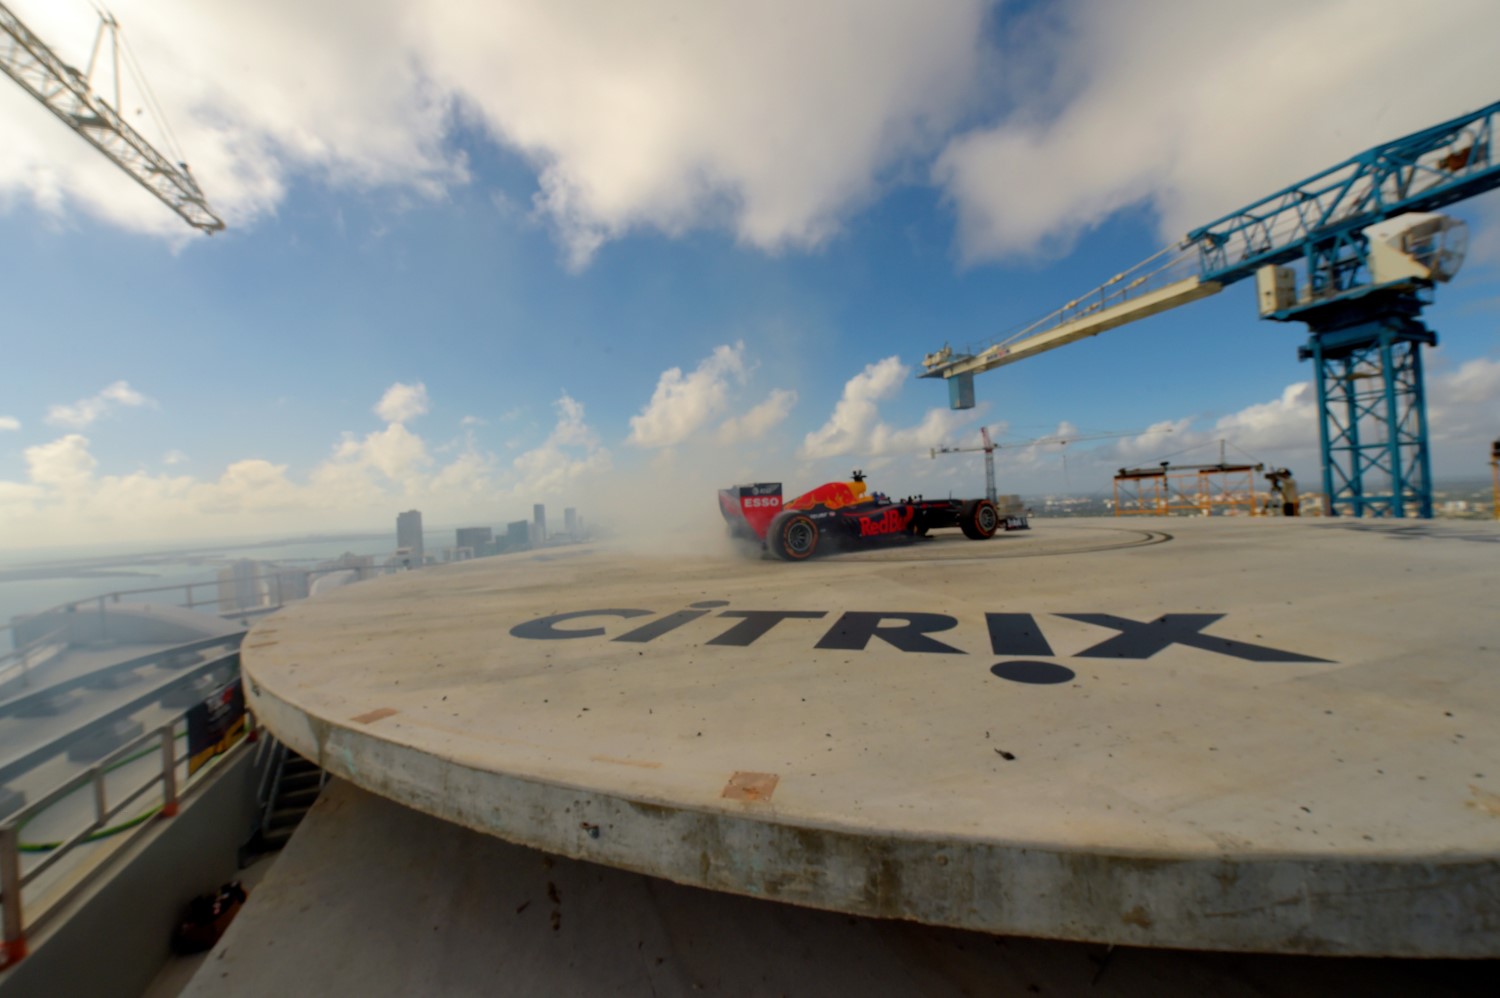 David Coulthard did donuts in Miami last year atop a heliport, but to no avail, F1 is unlikely to ever race in Miami